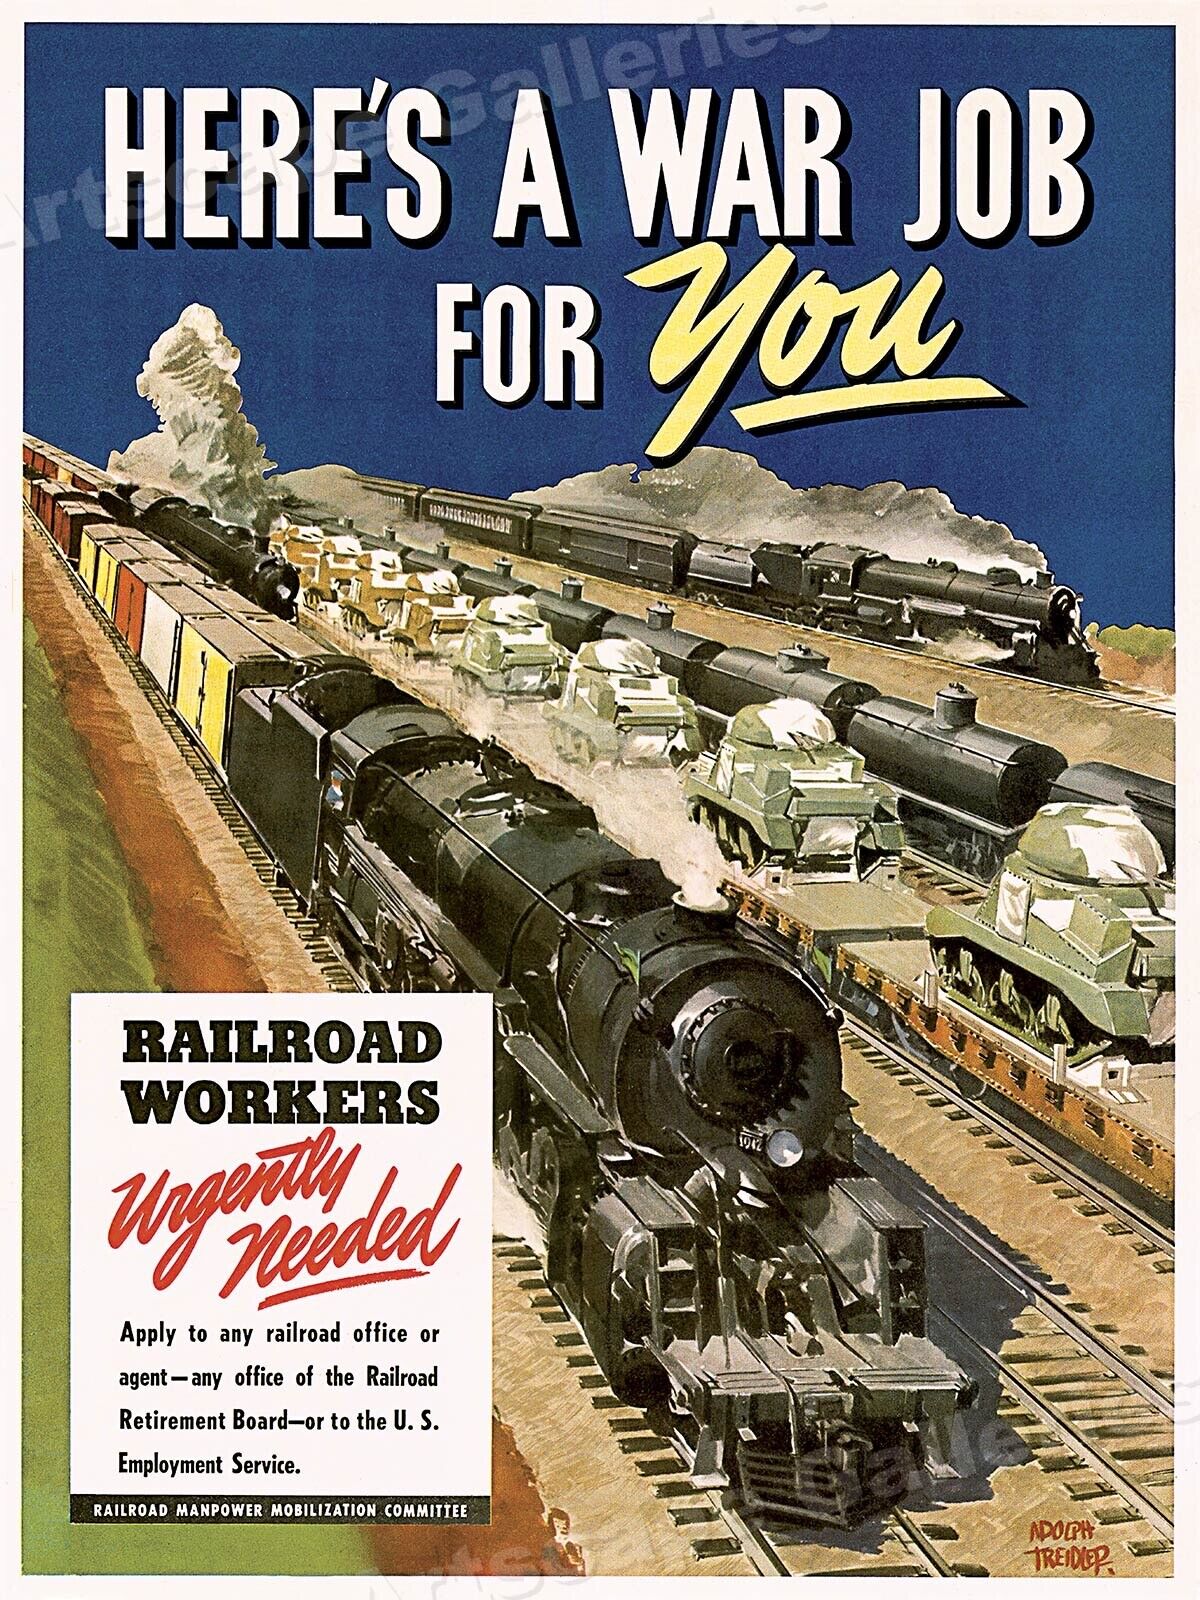 Here's a War Job - Railroad Workers Urgently Needed - WW2 Railroad Poster  18x24